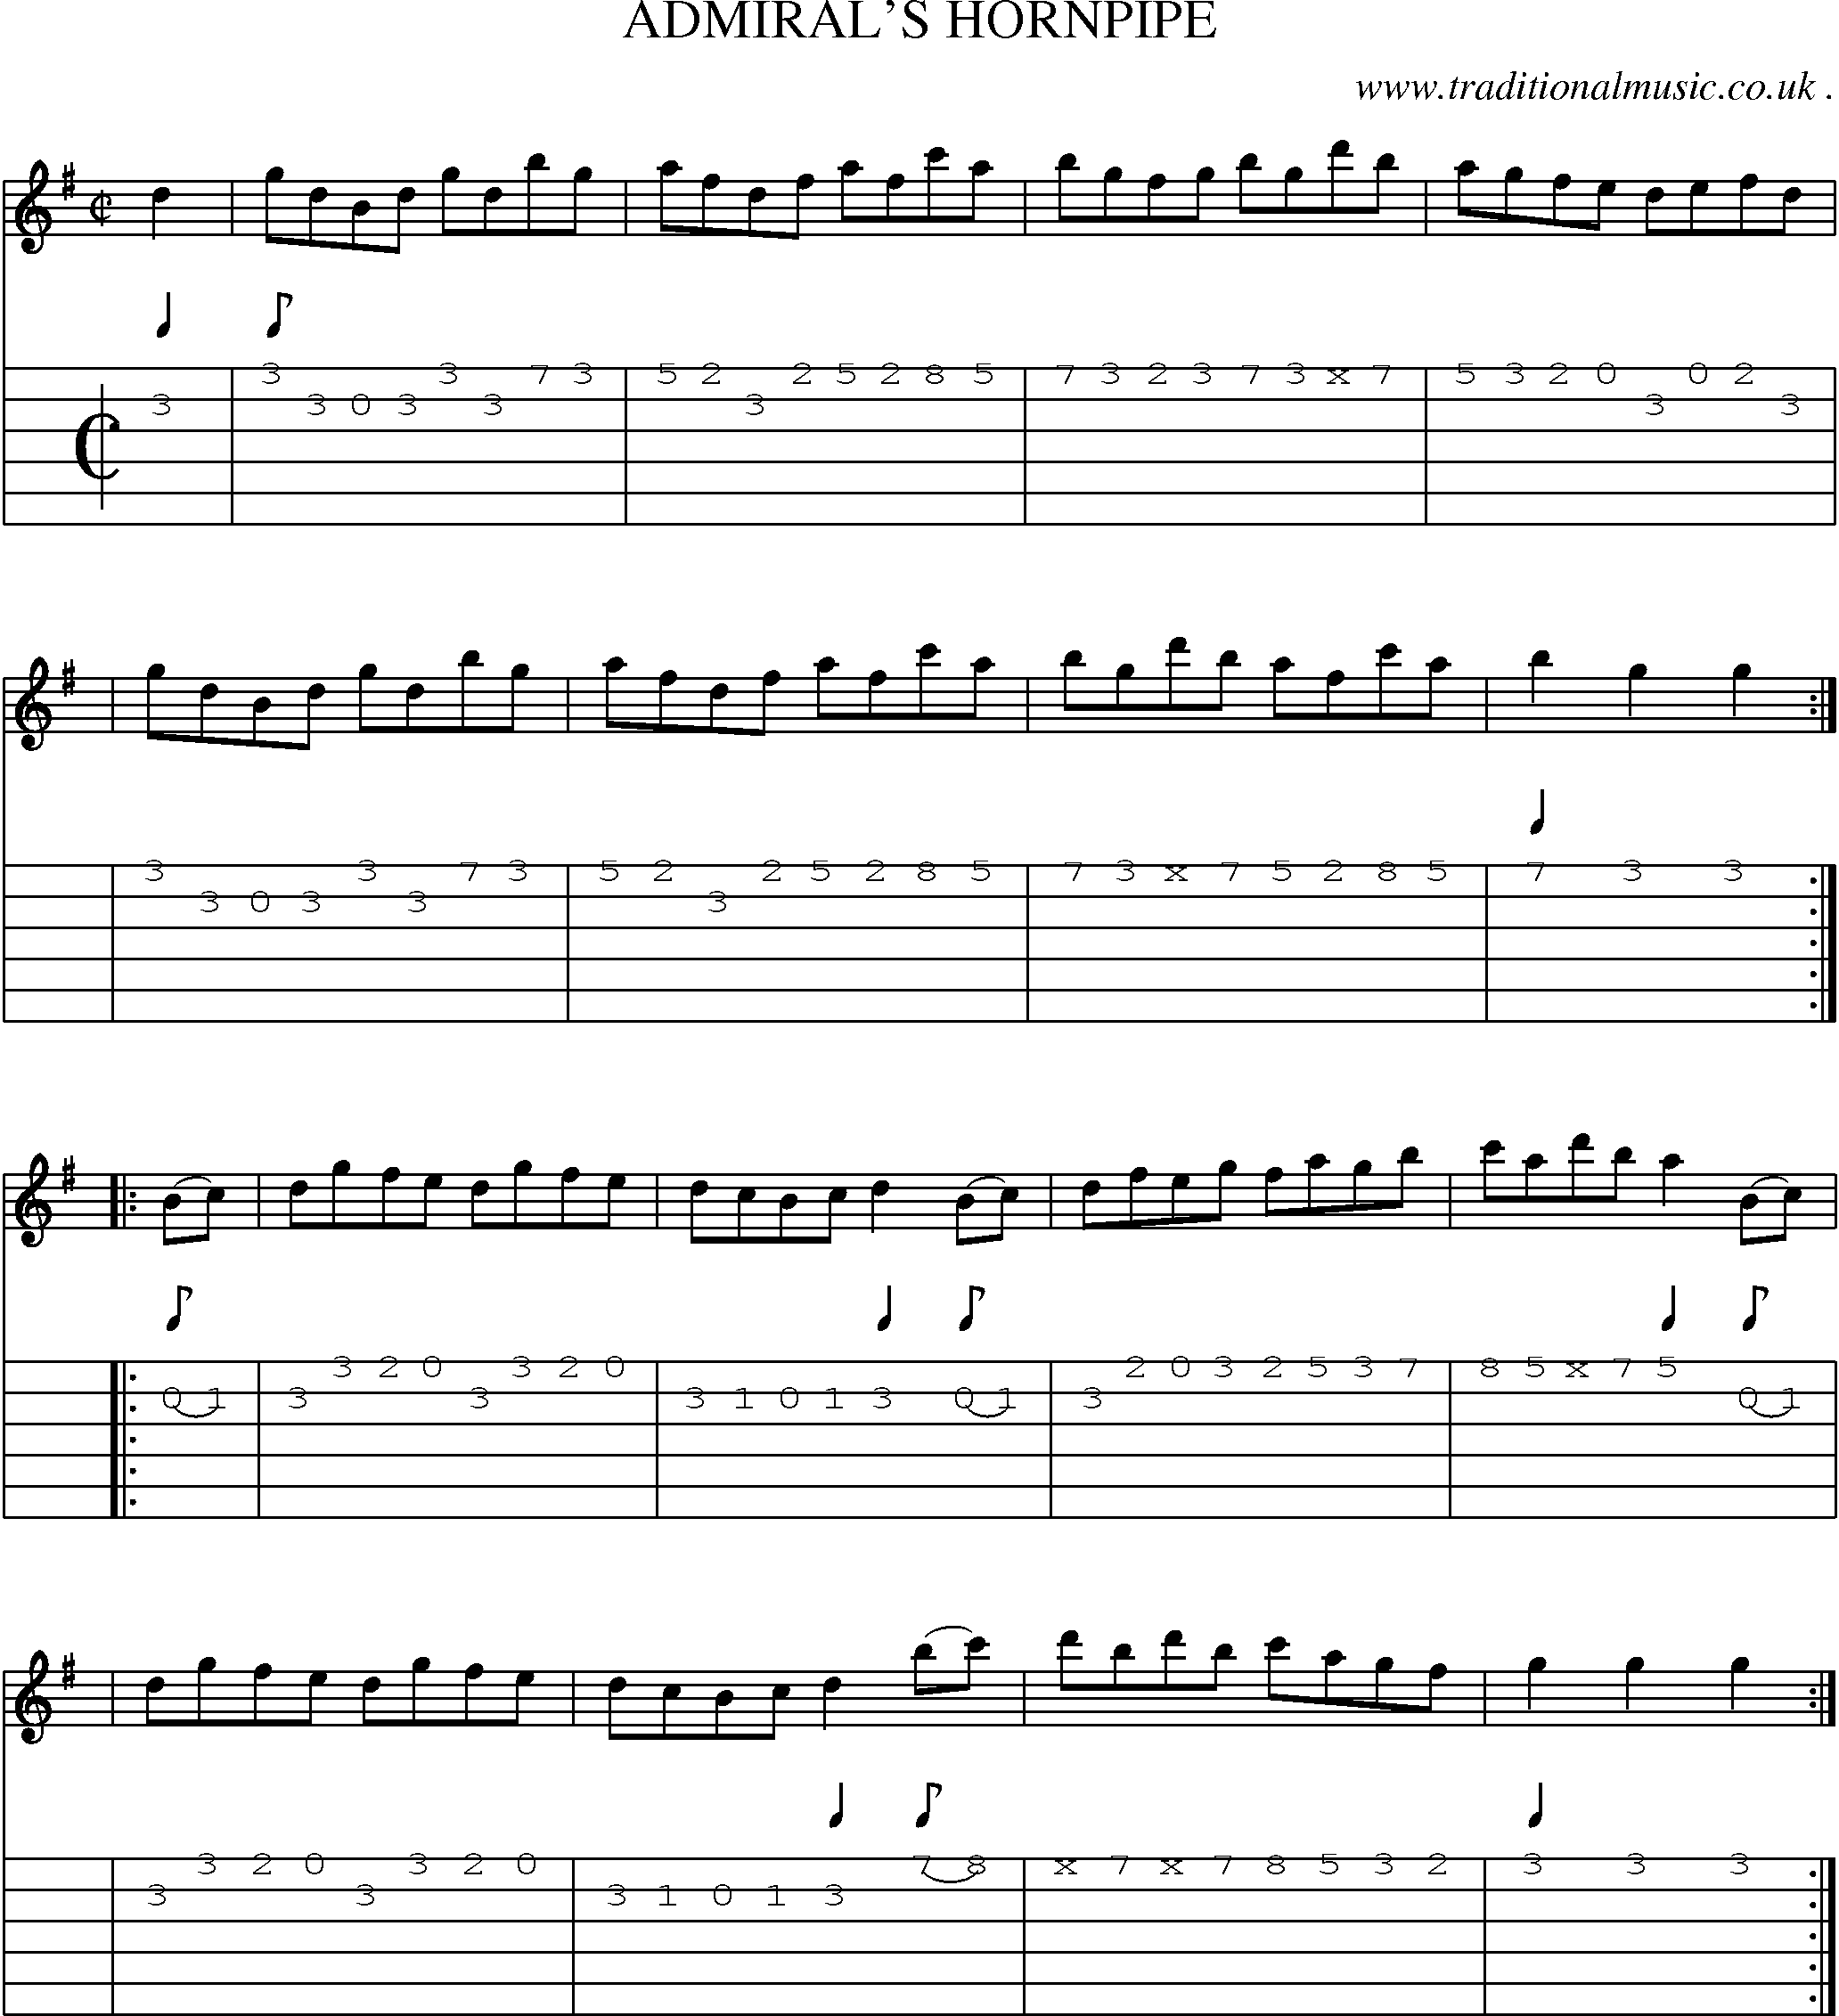 Sheet-Music and Guitar Tabs for Admirals Hornpipe